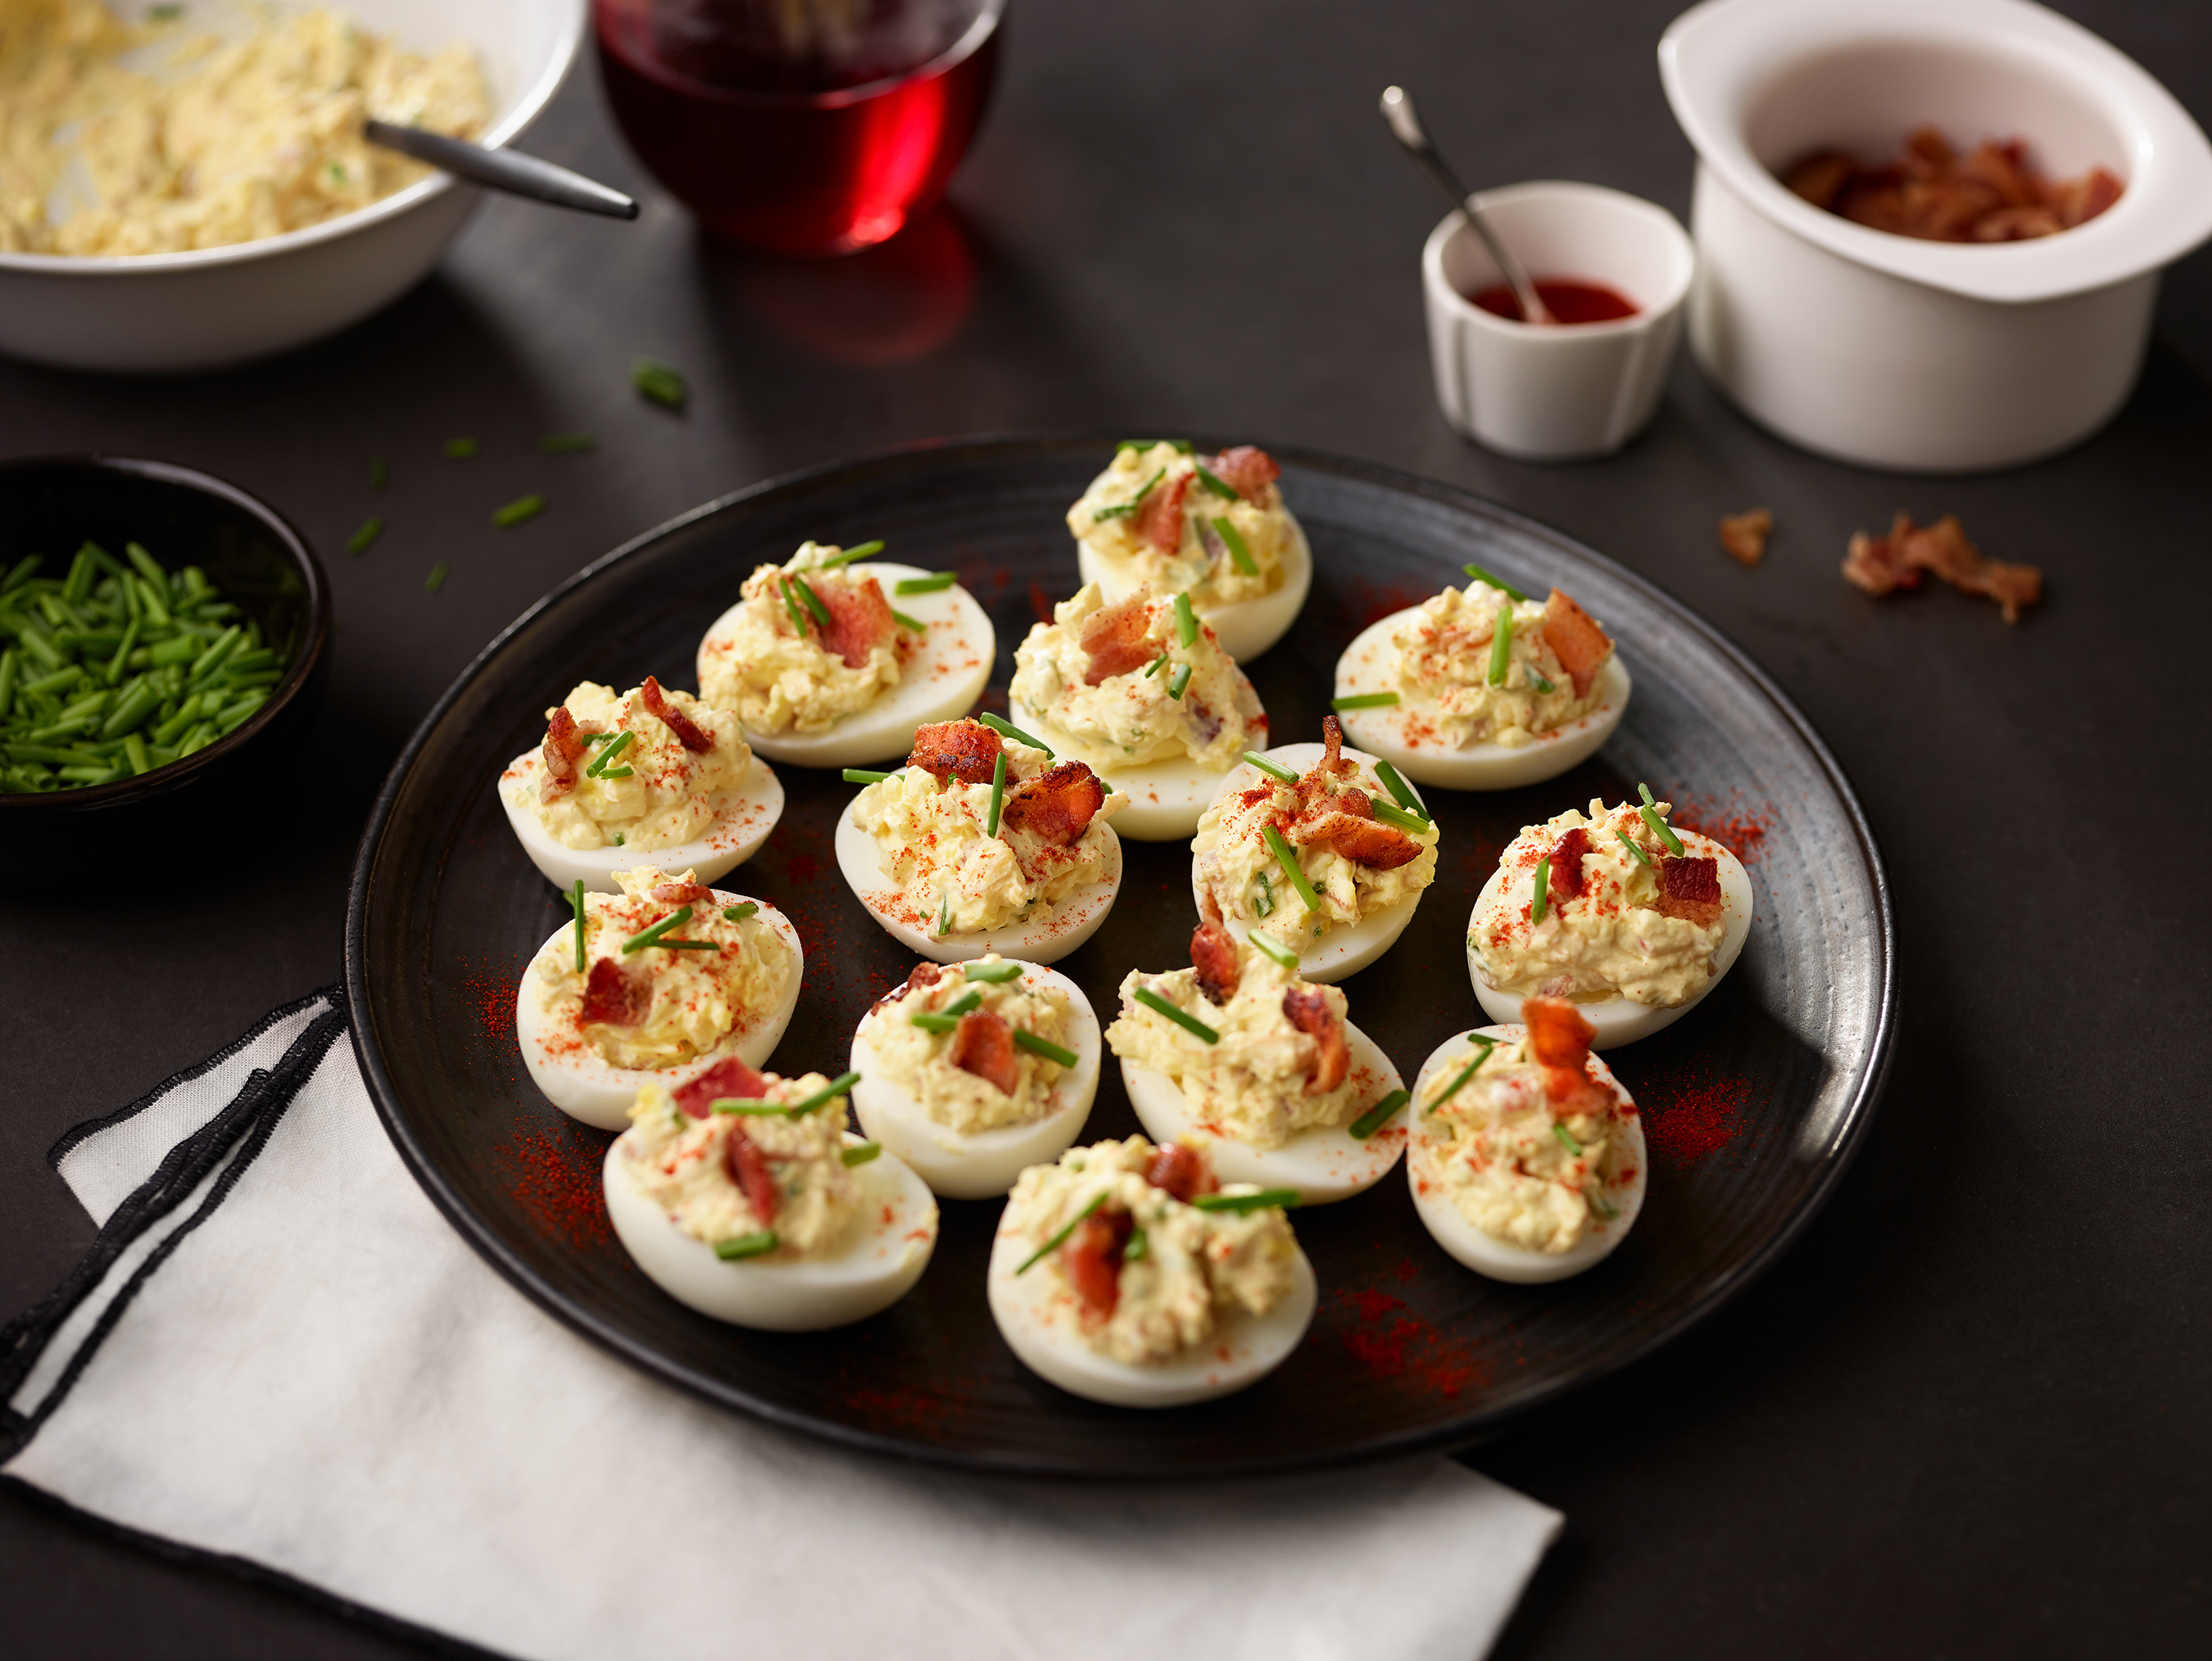 These heavenly deviled eggs include crumbled bacon, shredded cheddar cheese and fresh chives.